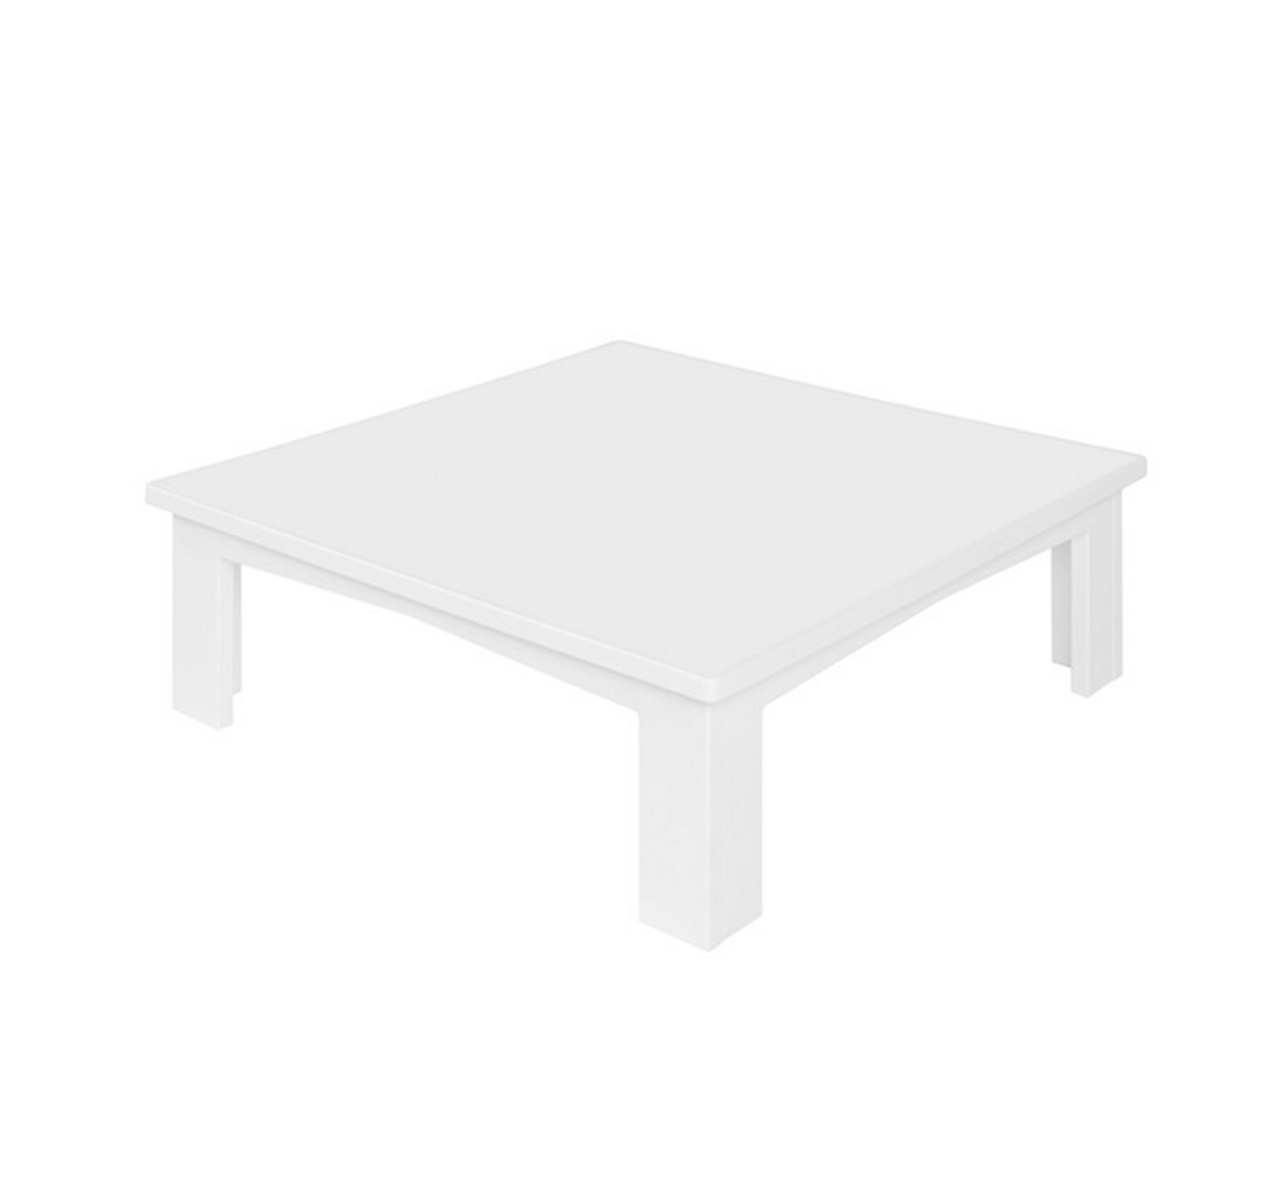 Ledge Lounger Mainstay Tall Square Side Table White